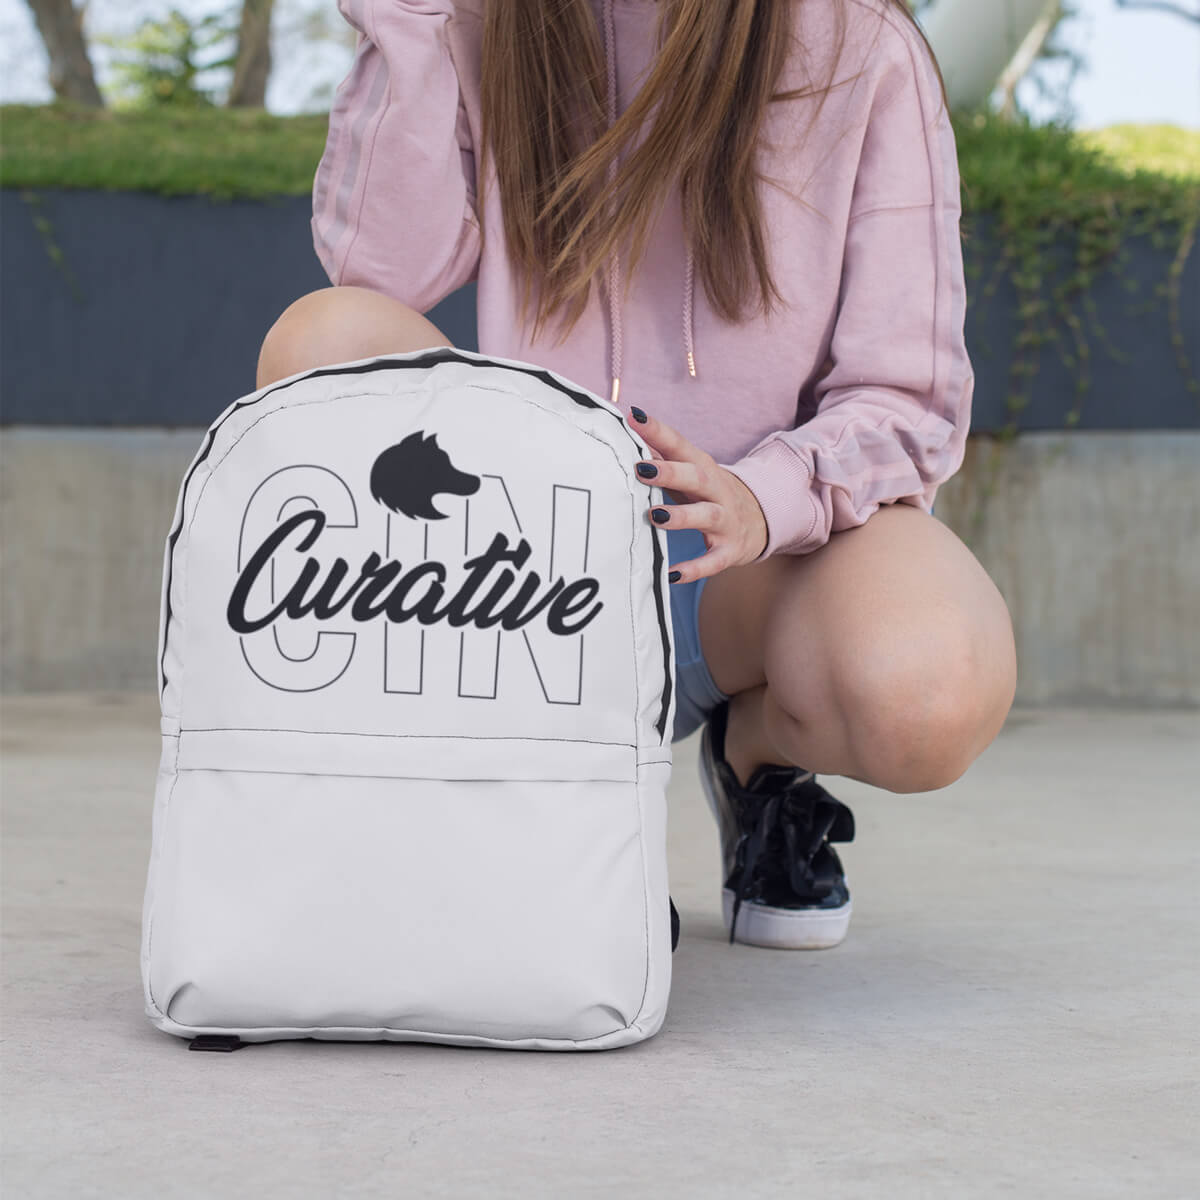 Girl kneeling with custom promotional backpack bag by curative printing